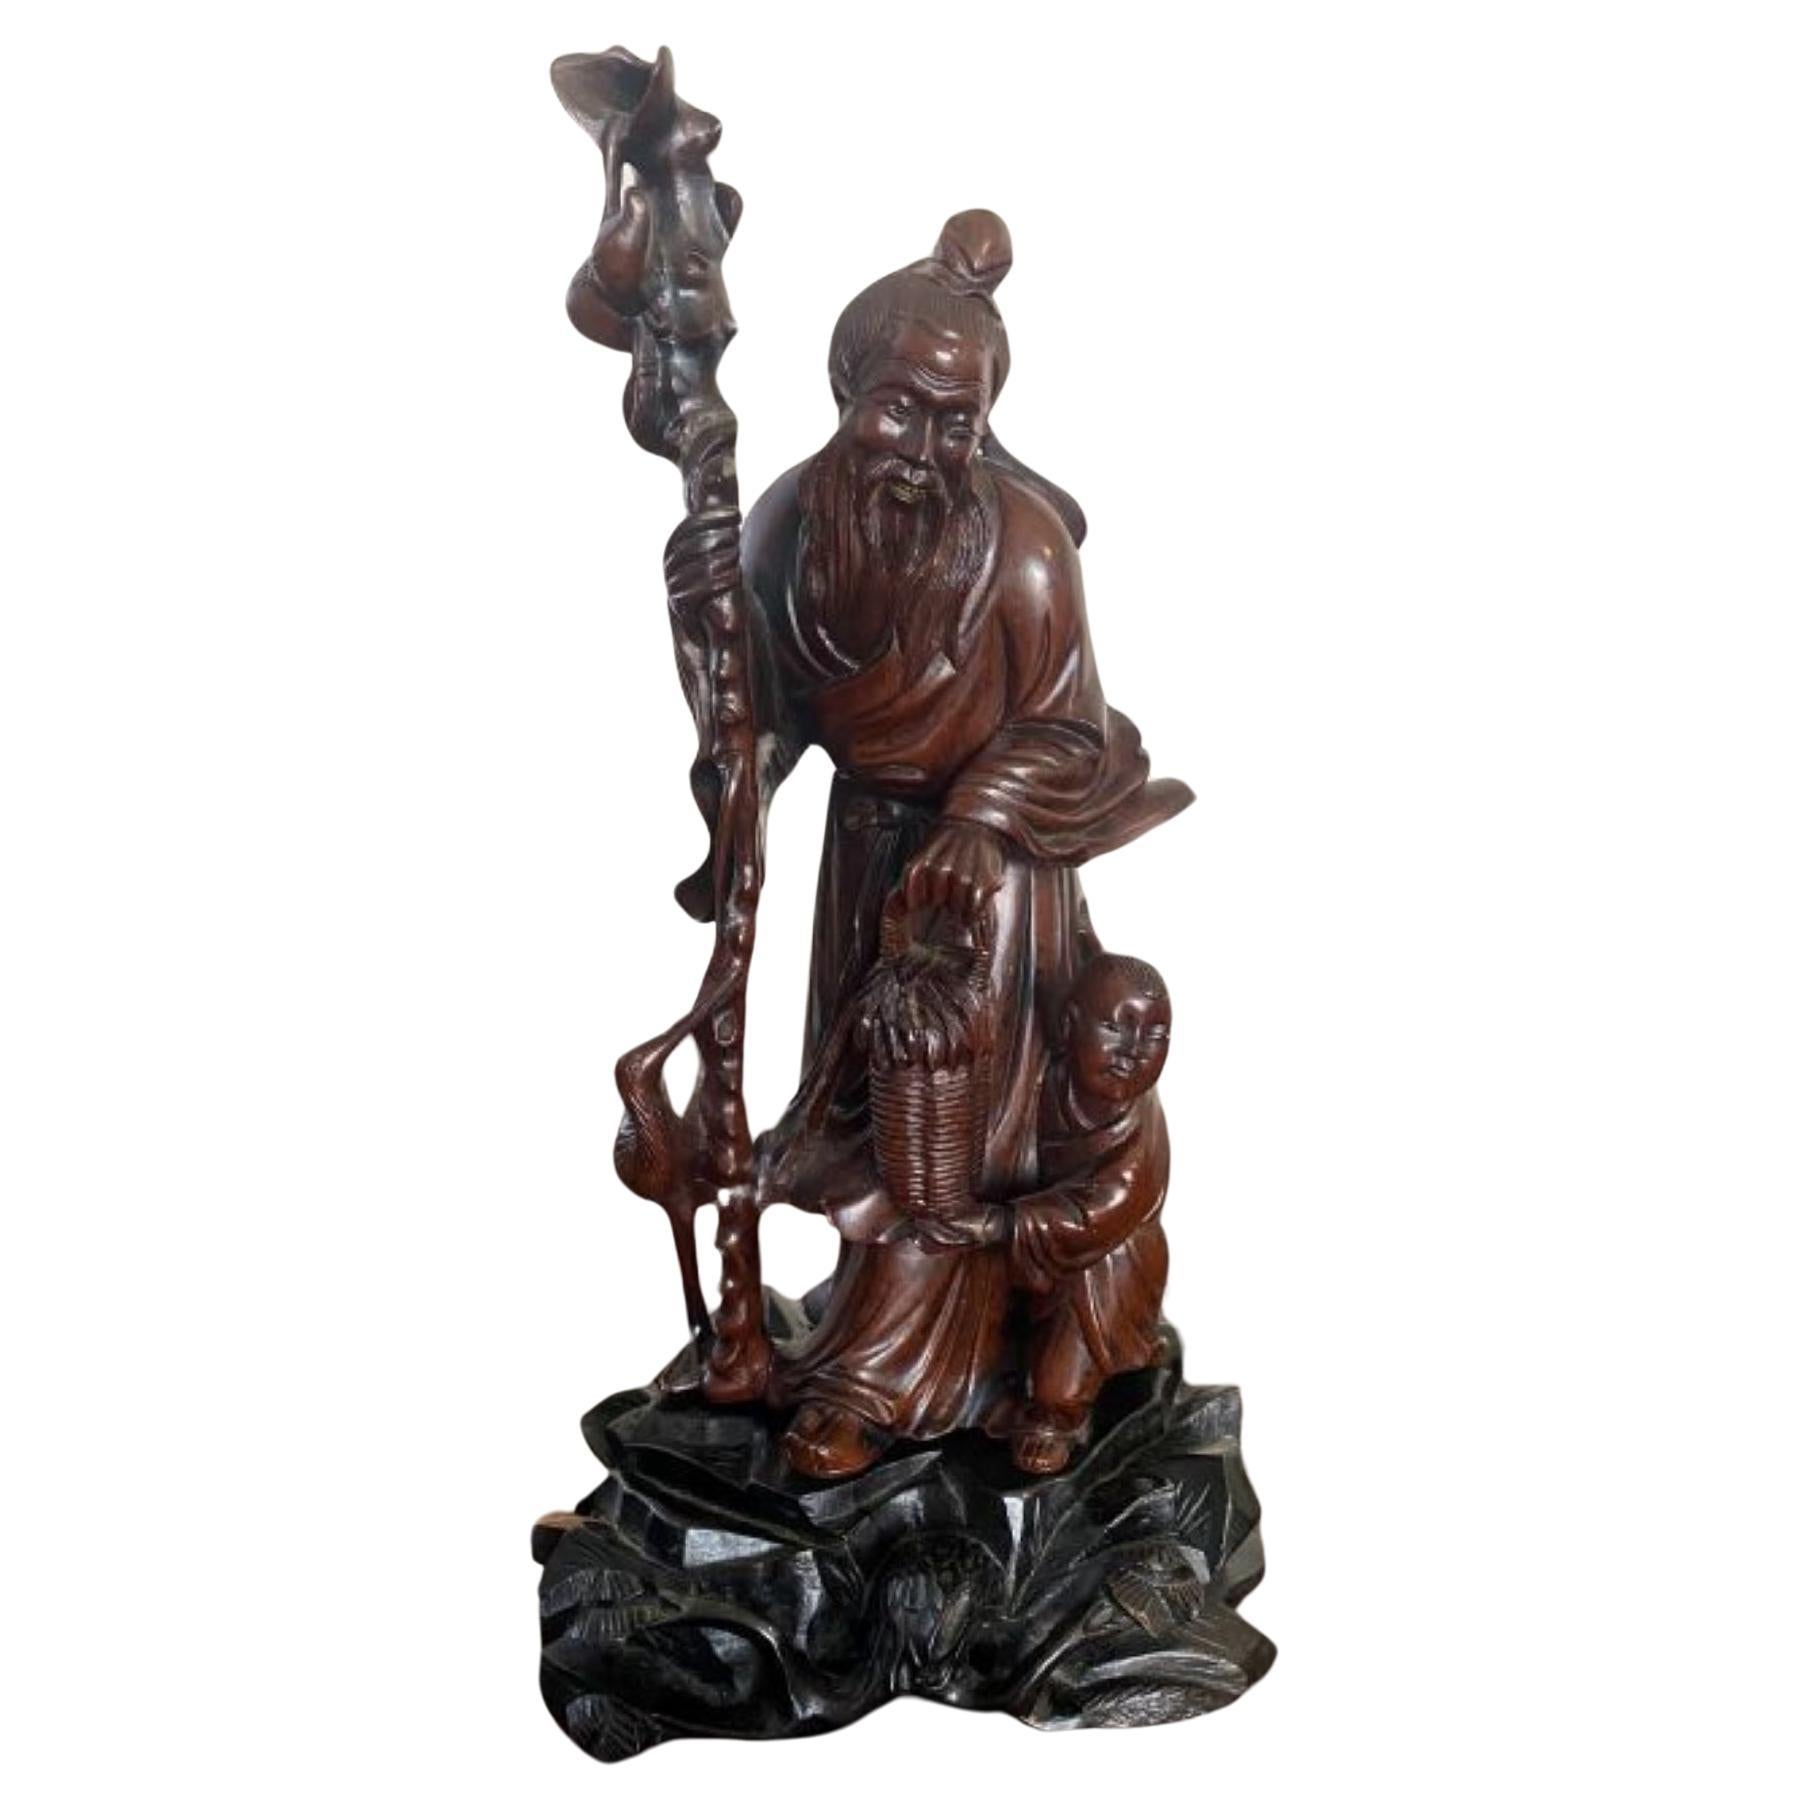 Quality antique Chinese carved hardwood figure